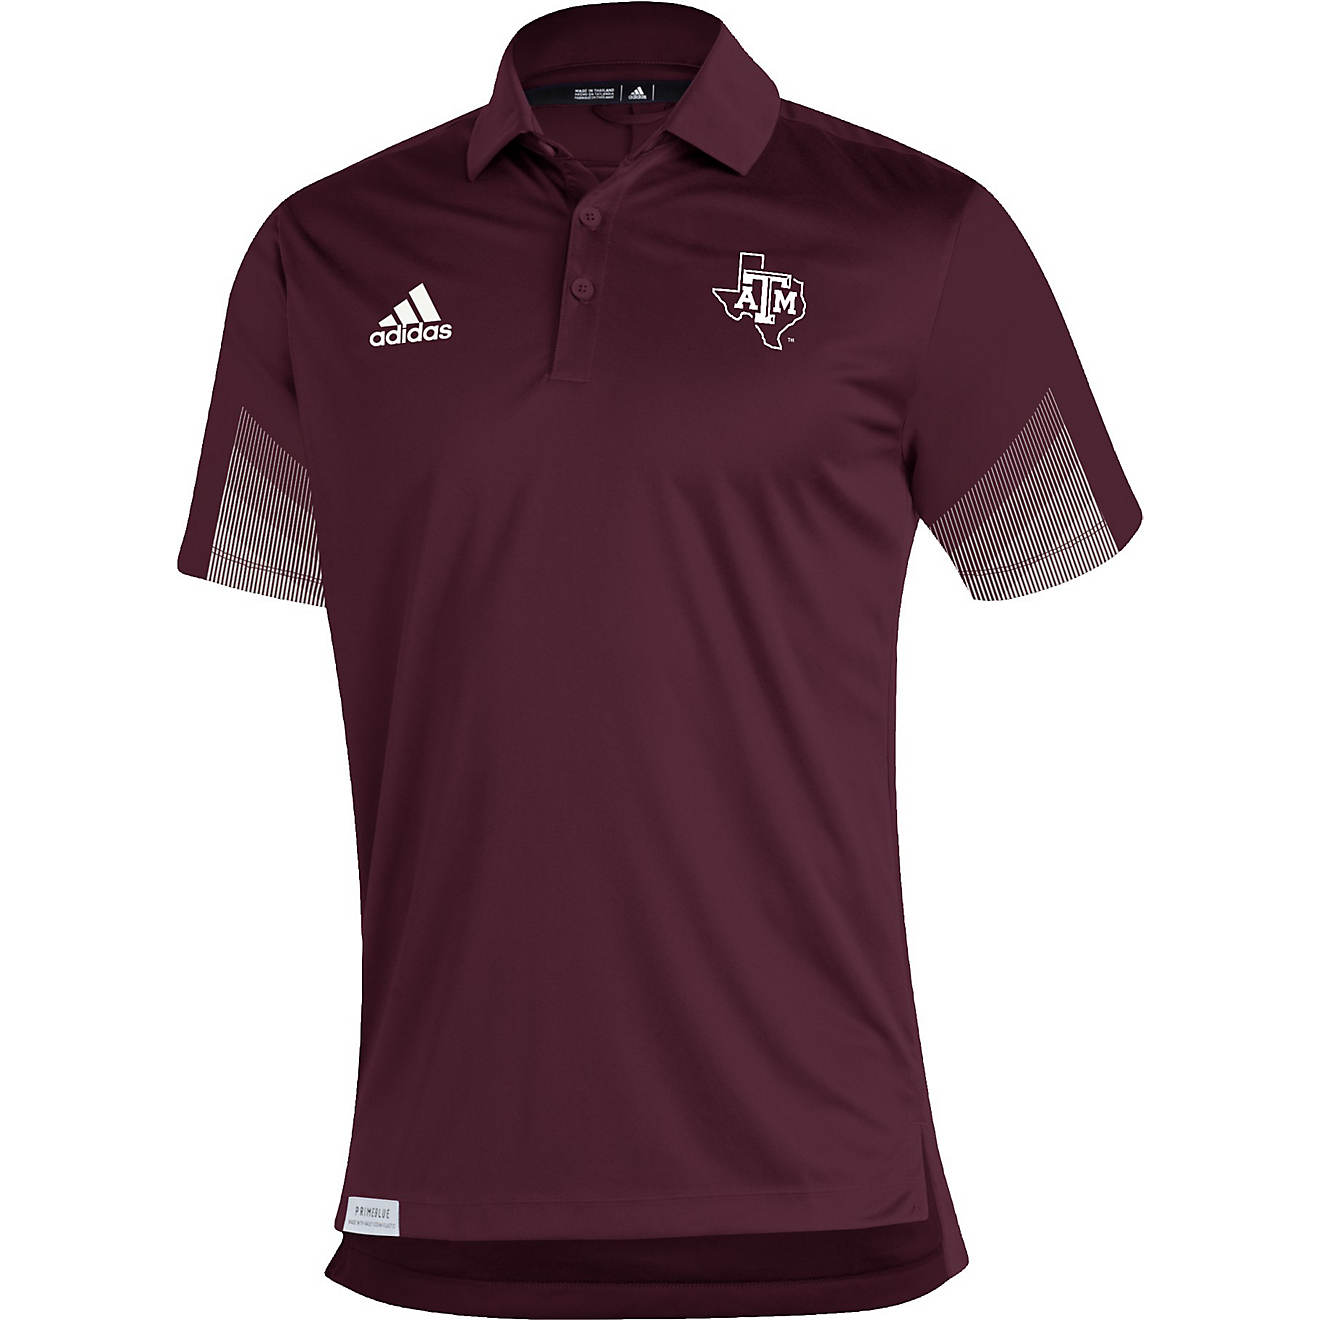 adidas Men's Texas A&M University Sideline 21 Primeblue Polo Shirt                                                               - view number 1